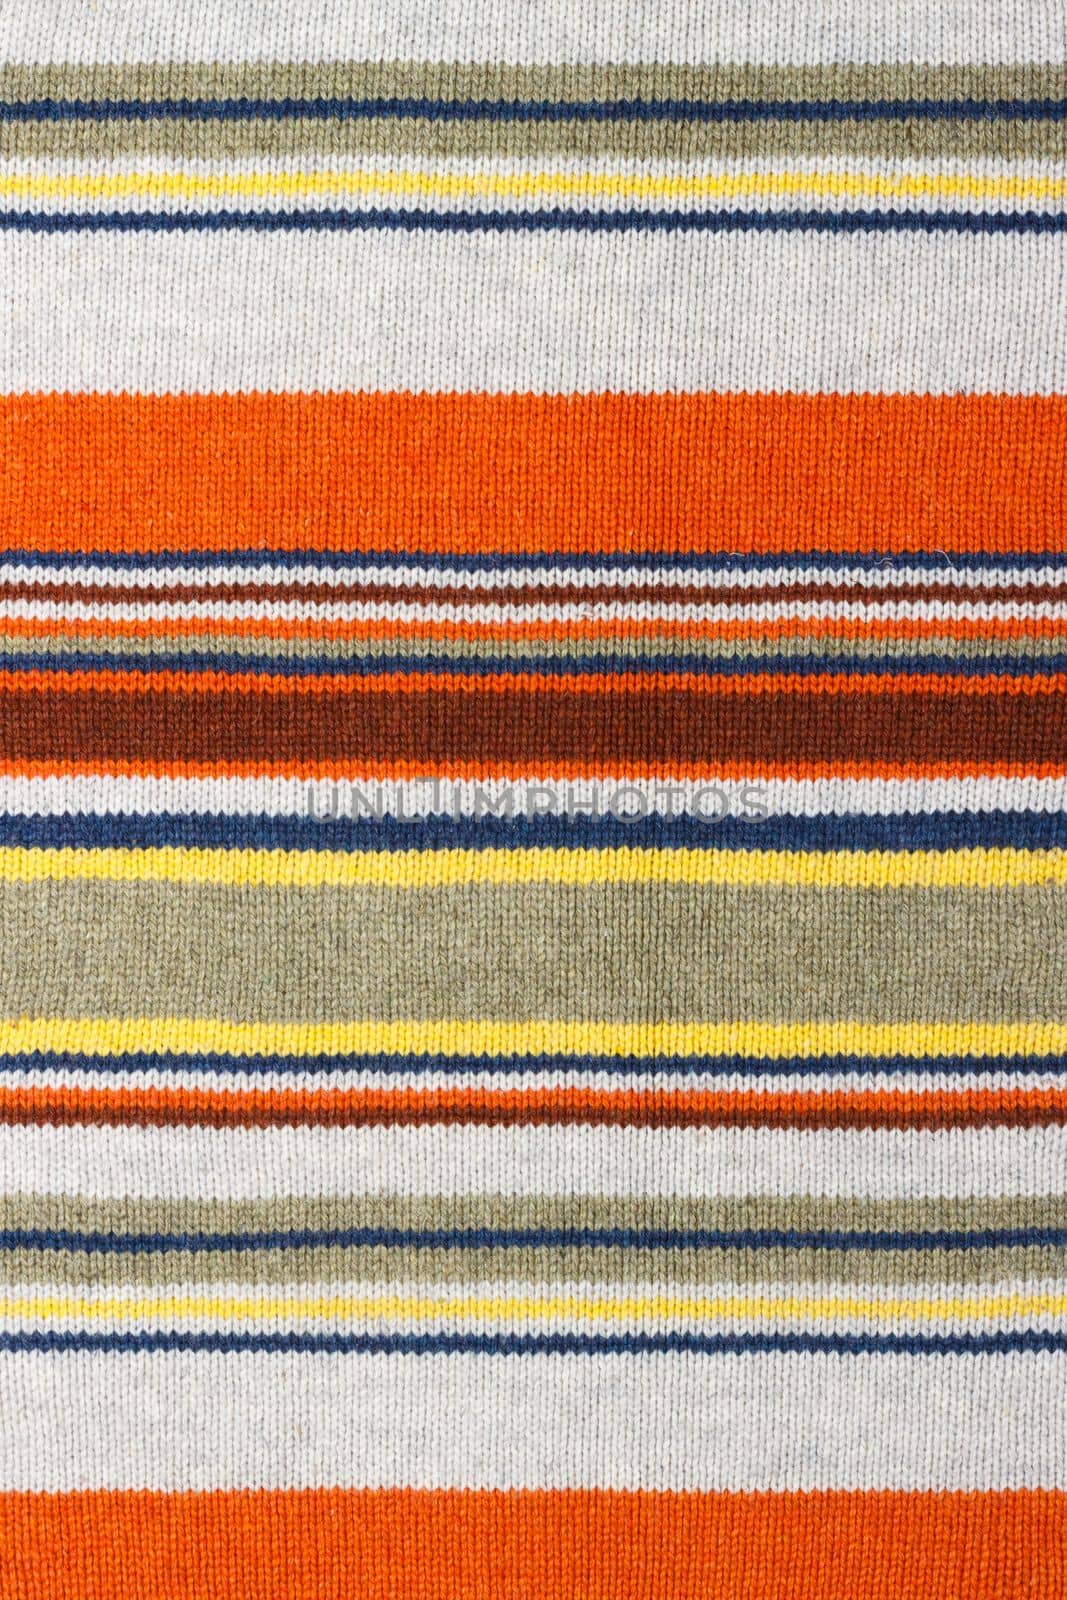 Colorful stripy mohair woolen fabric texture close up. Fabric multicolor background by Snegok1967